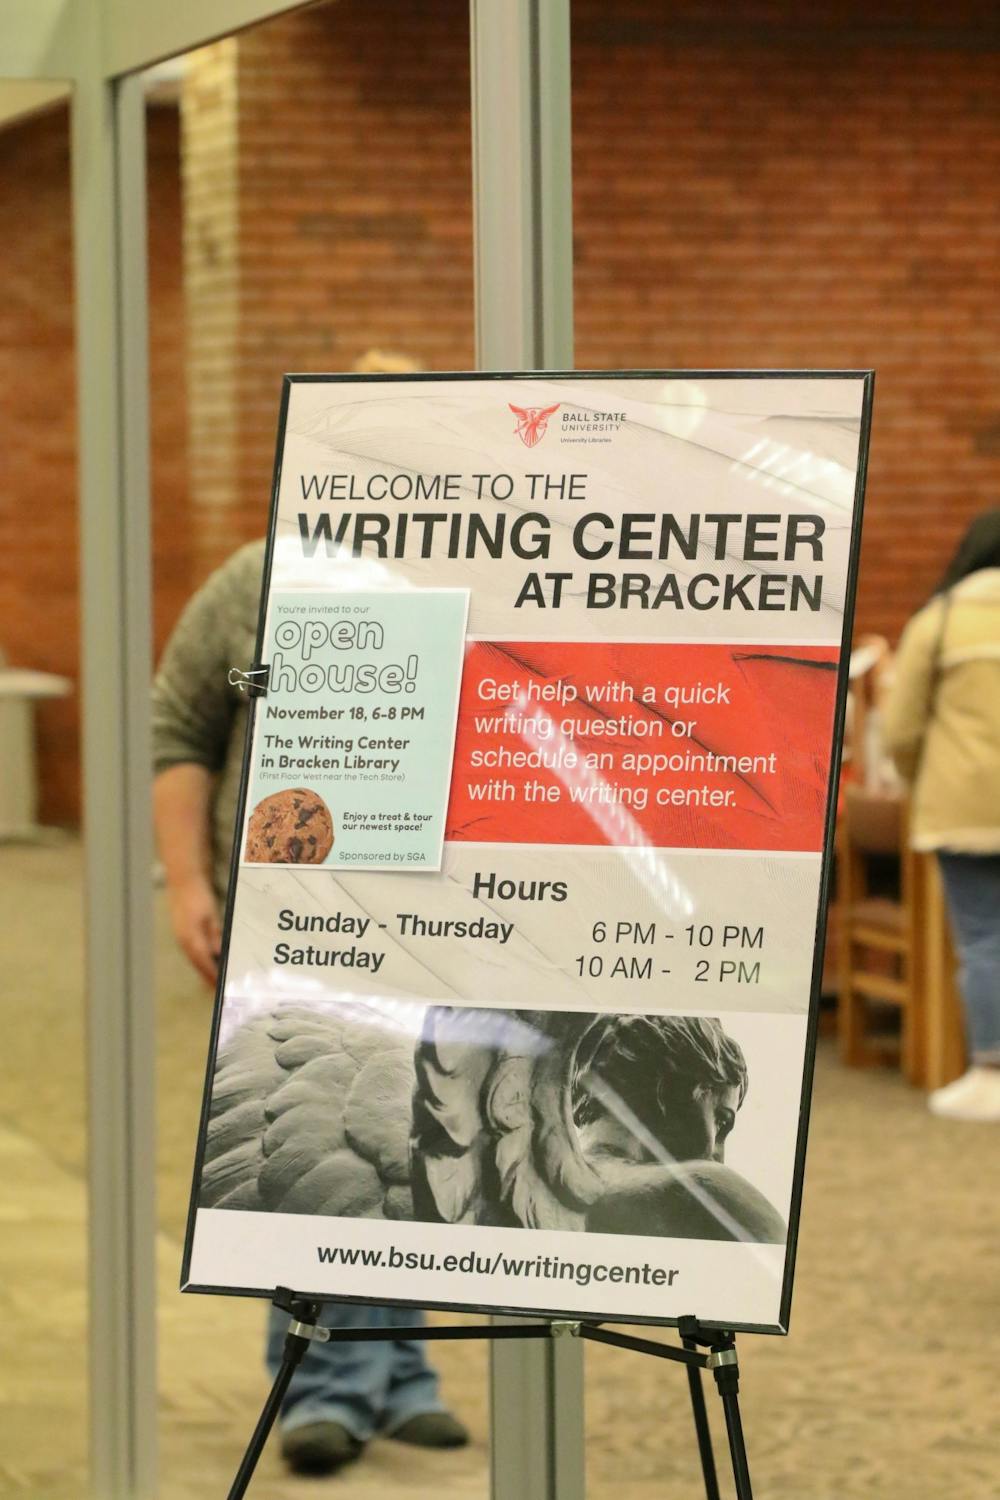 <p>Ball State opened its second Writing Center in Bracken Library Nov. 18. The Writing Center now has locations in the Robert Bell Building and the library.<strong> Eli Houser, DN</strong></p>